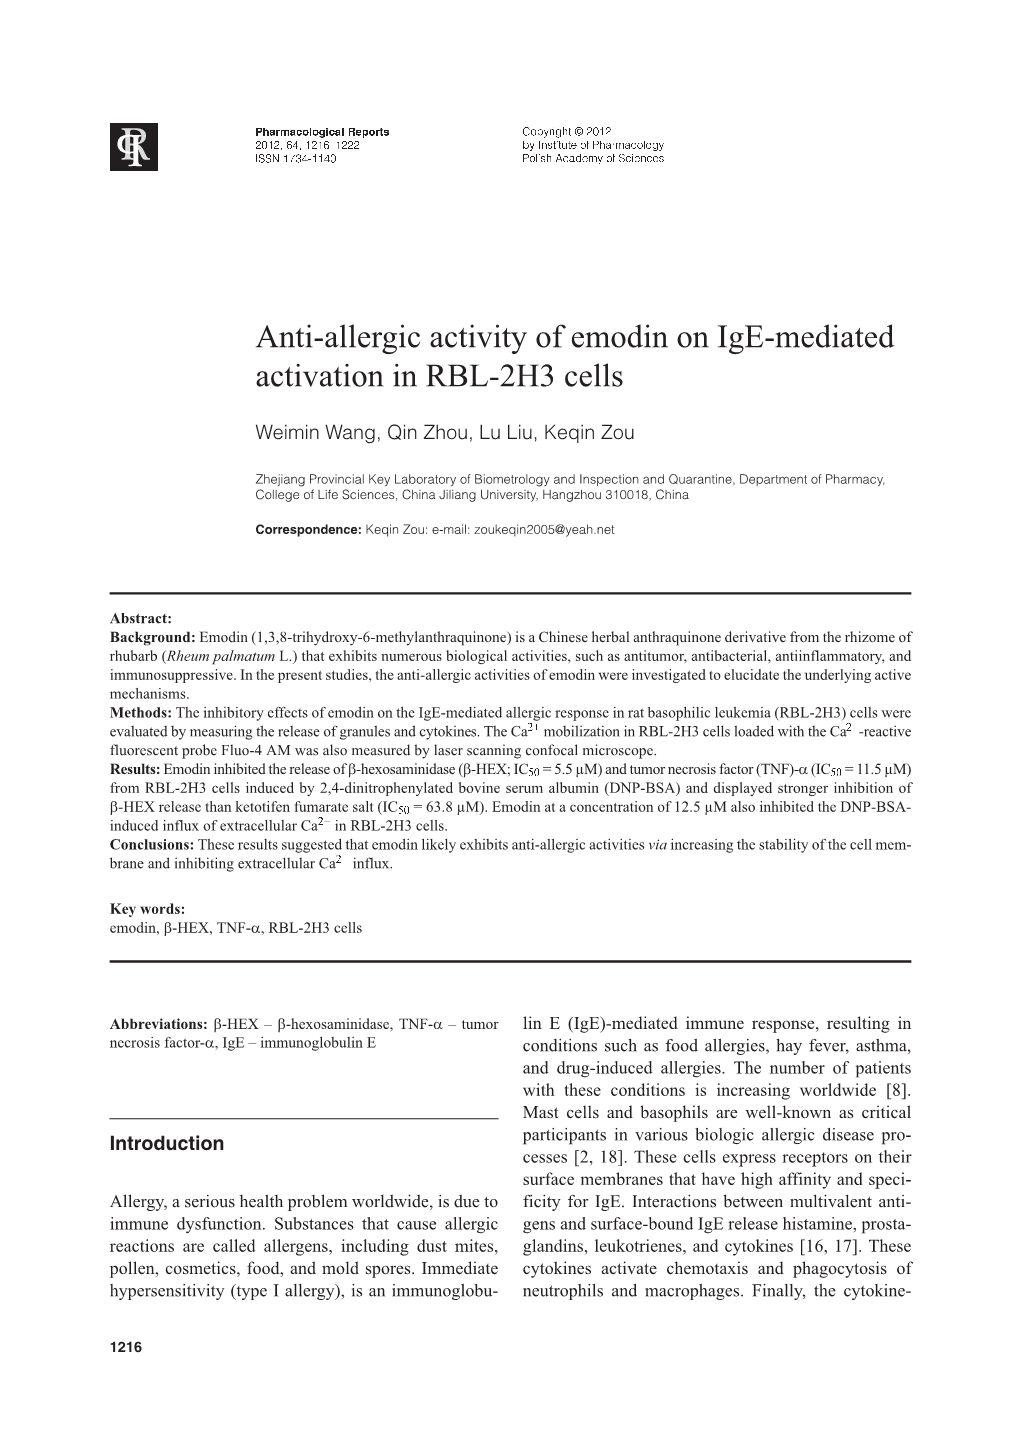 Anti-Allergic Activity of Emodin on Ige-Mediated Activation in RBL-2H3